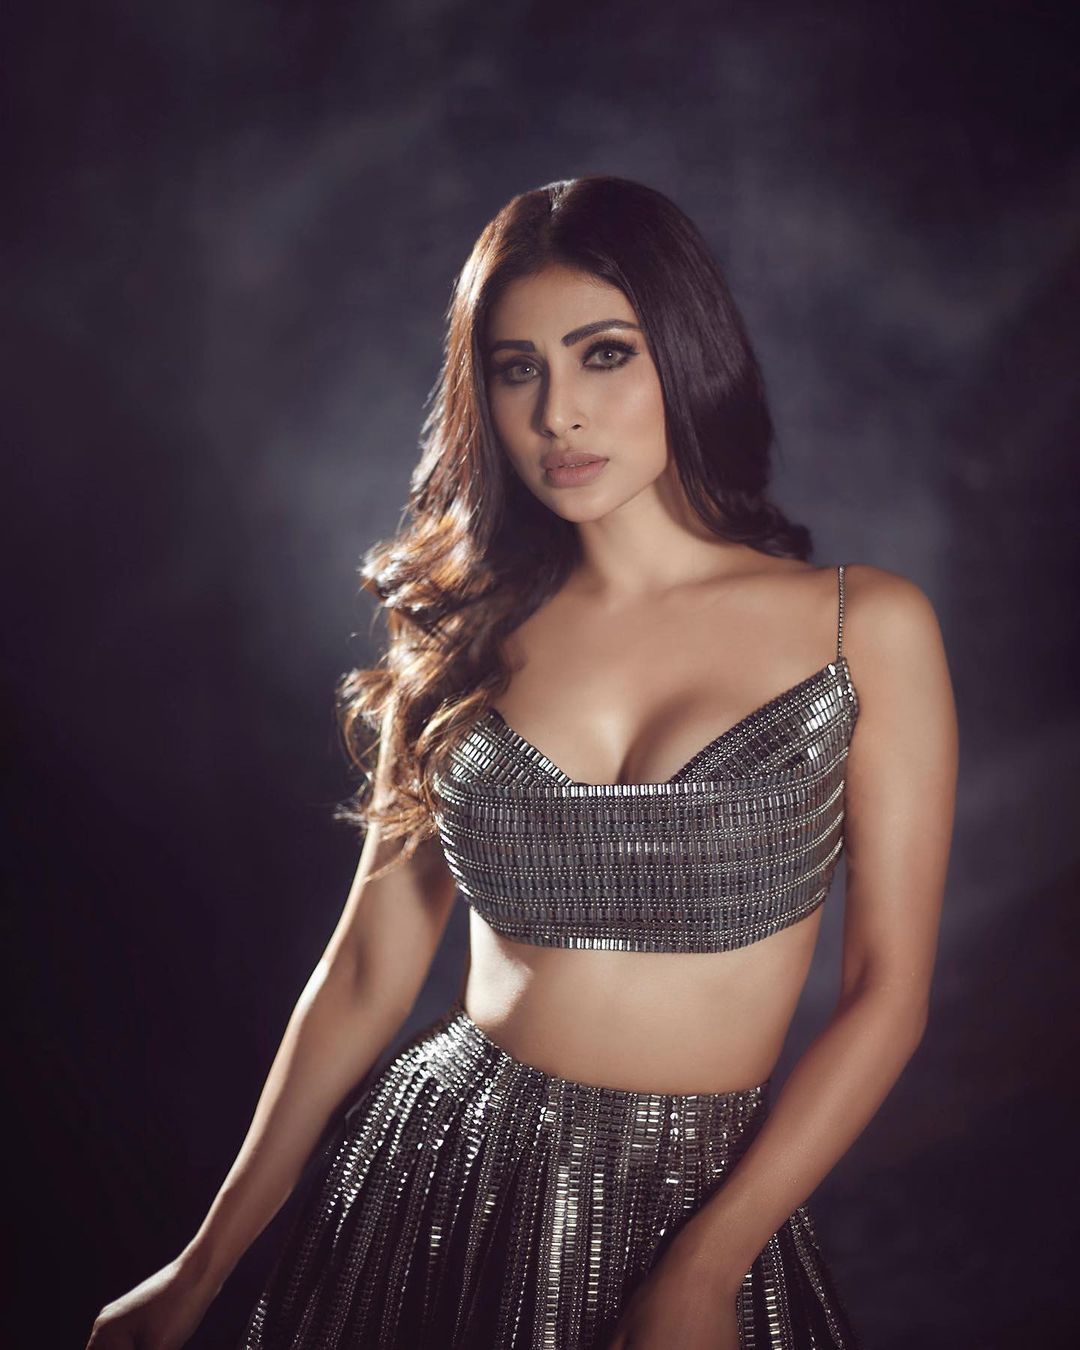 The Gold actress looks hotness overload as she poses for the lens in a tight fitted cleavage baring sequinned choli